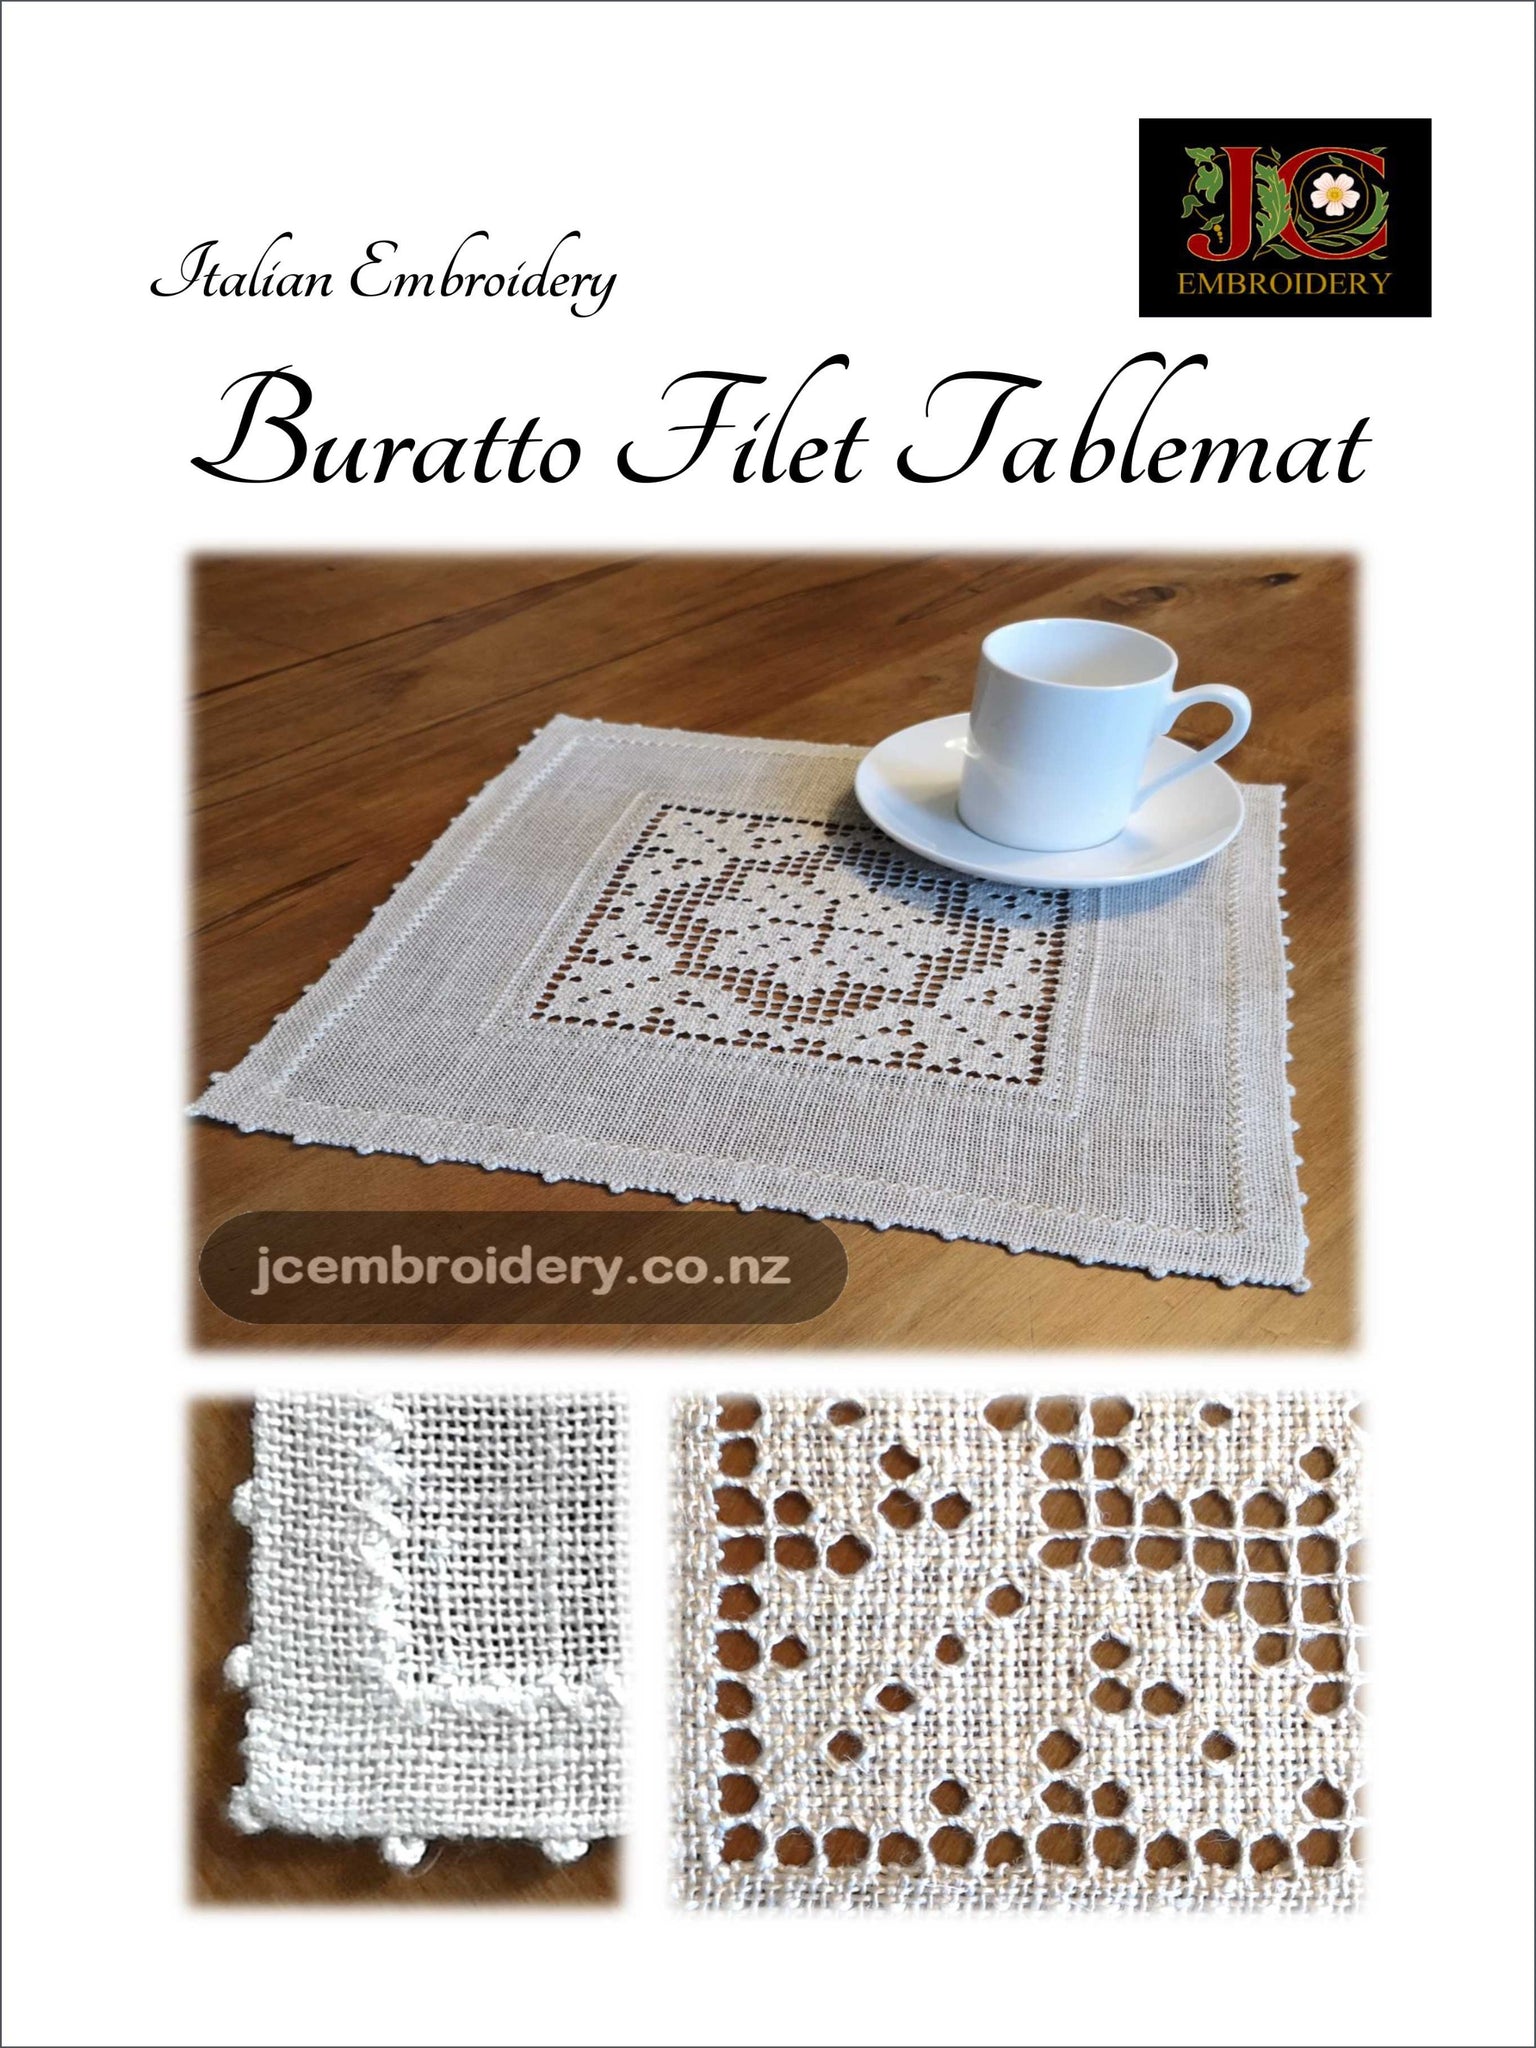 Buratto Filet Tablemat